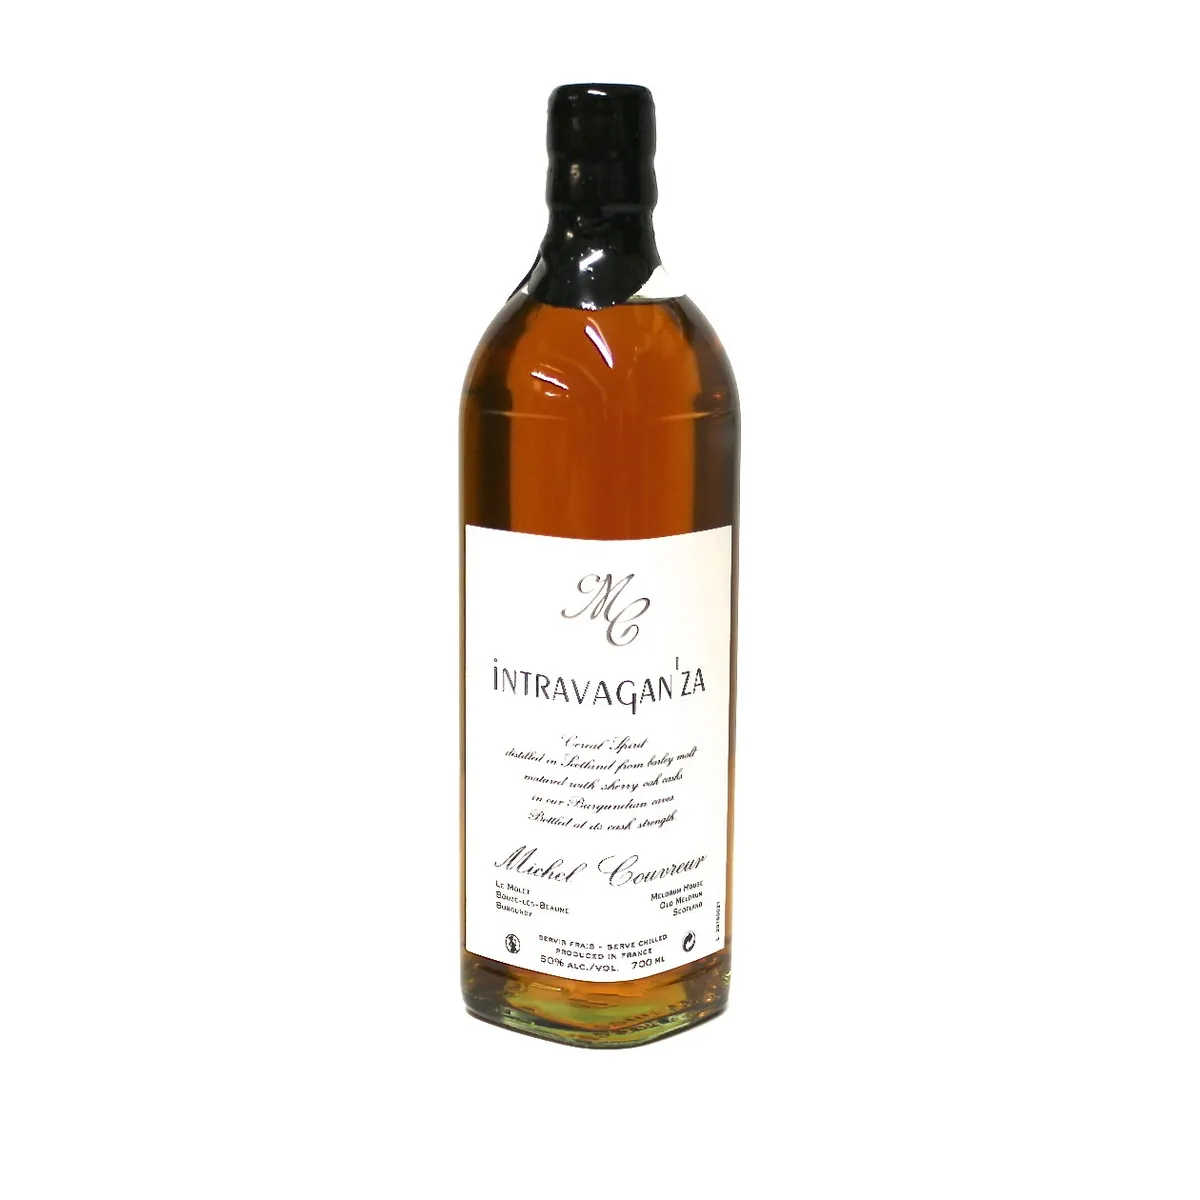 whisky intravagan za michel couvreur  50° 70cl